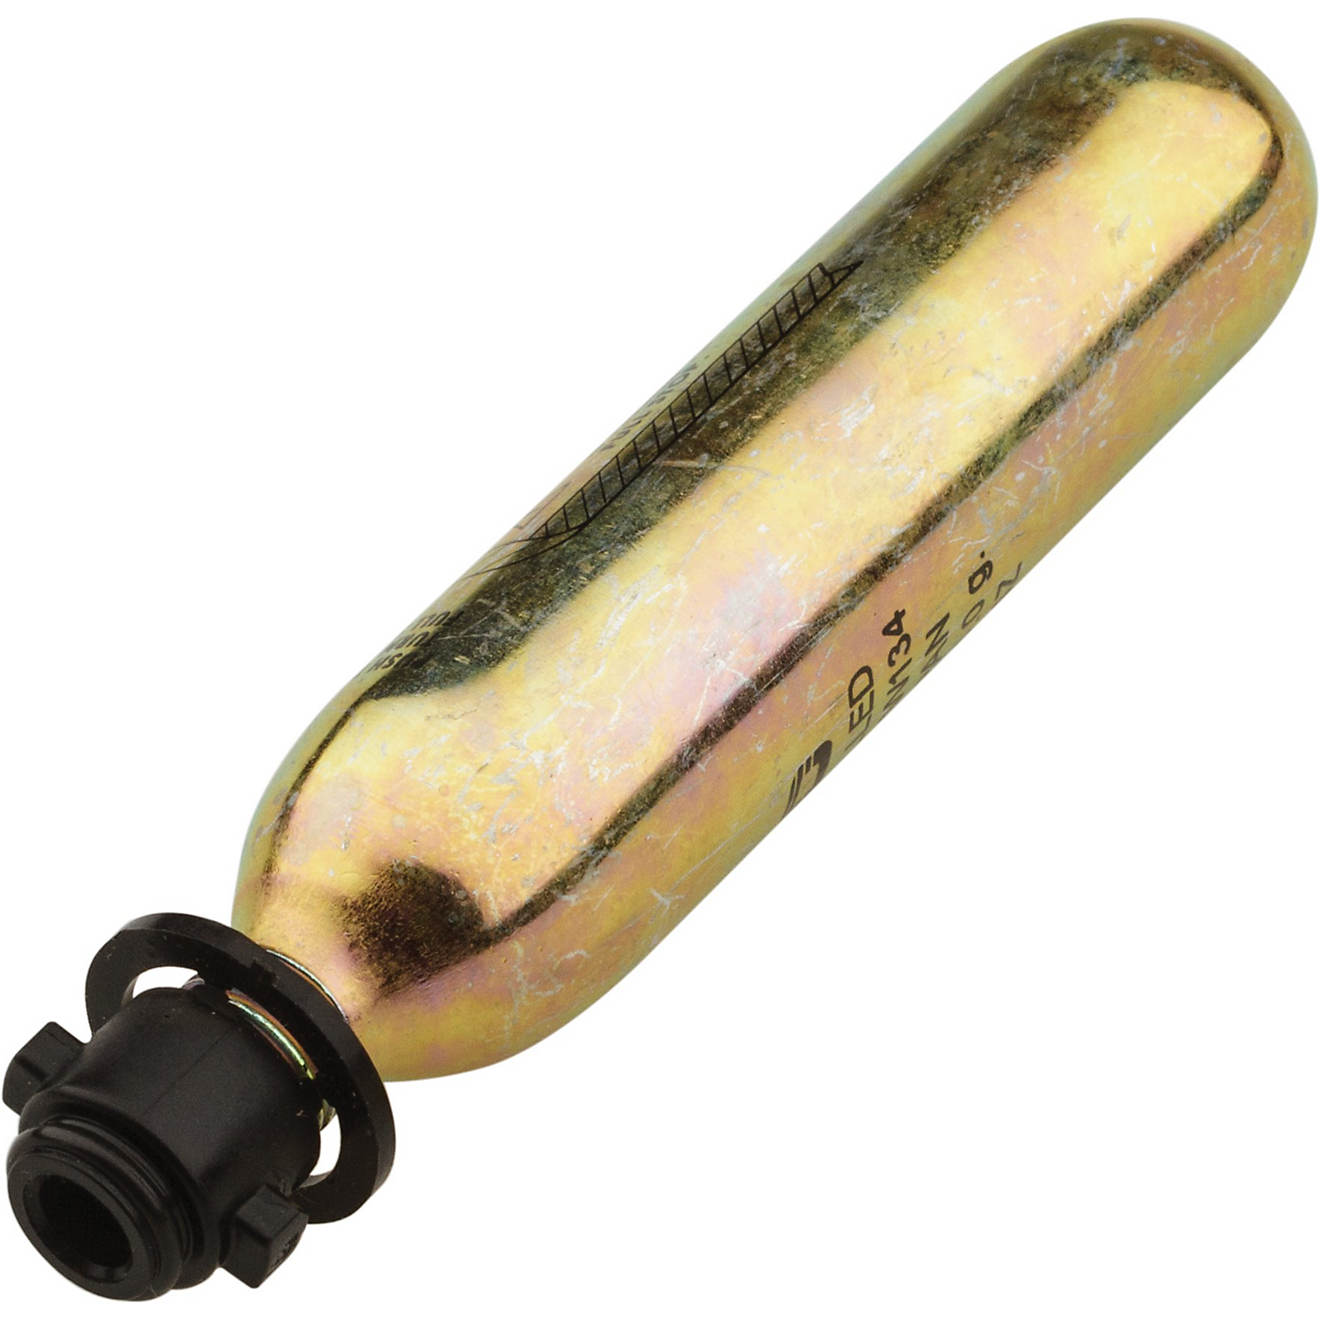 Onyx Outdoor M-24 In-Sight 24 gram Inflatable Life Jacket CO2 Rearming Kit                                                       - view number 1